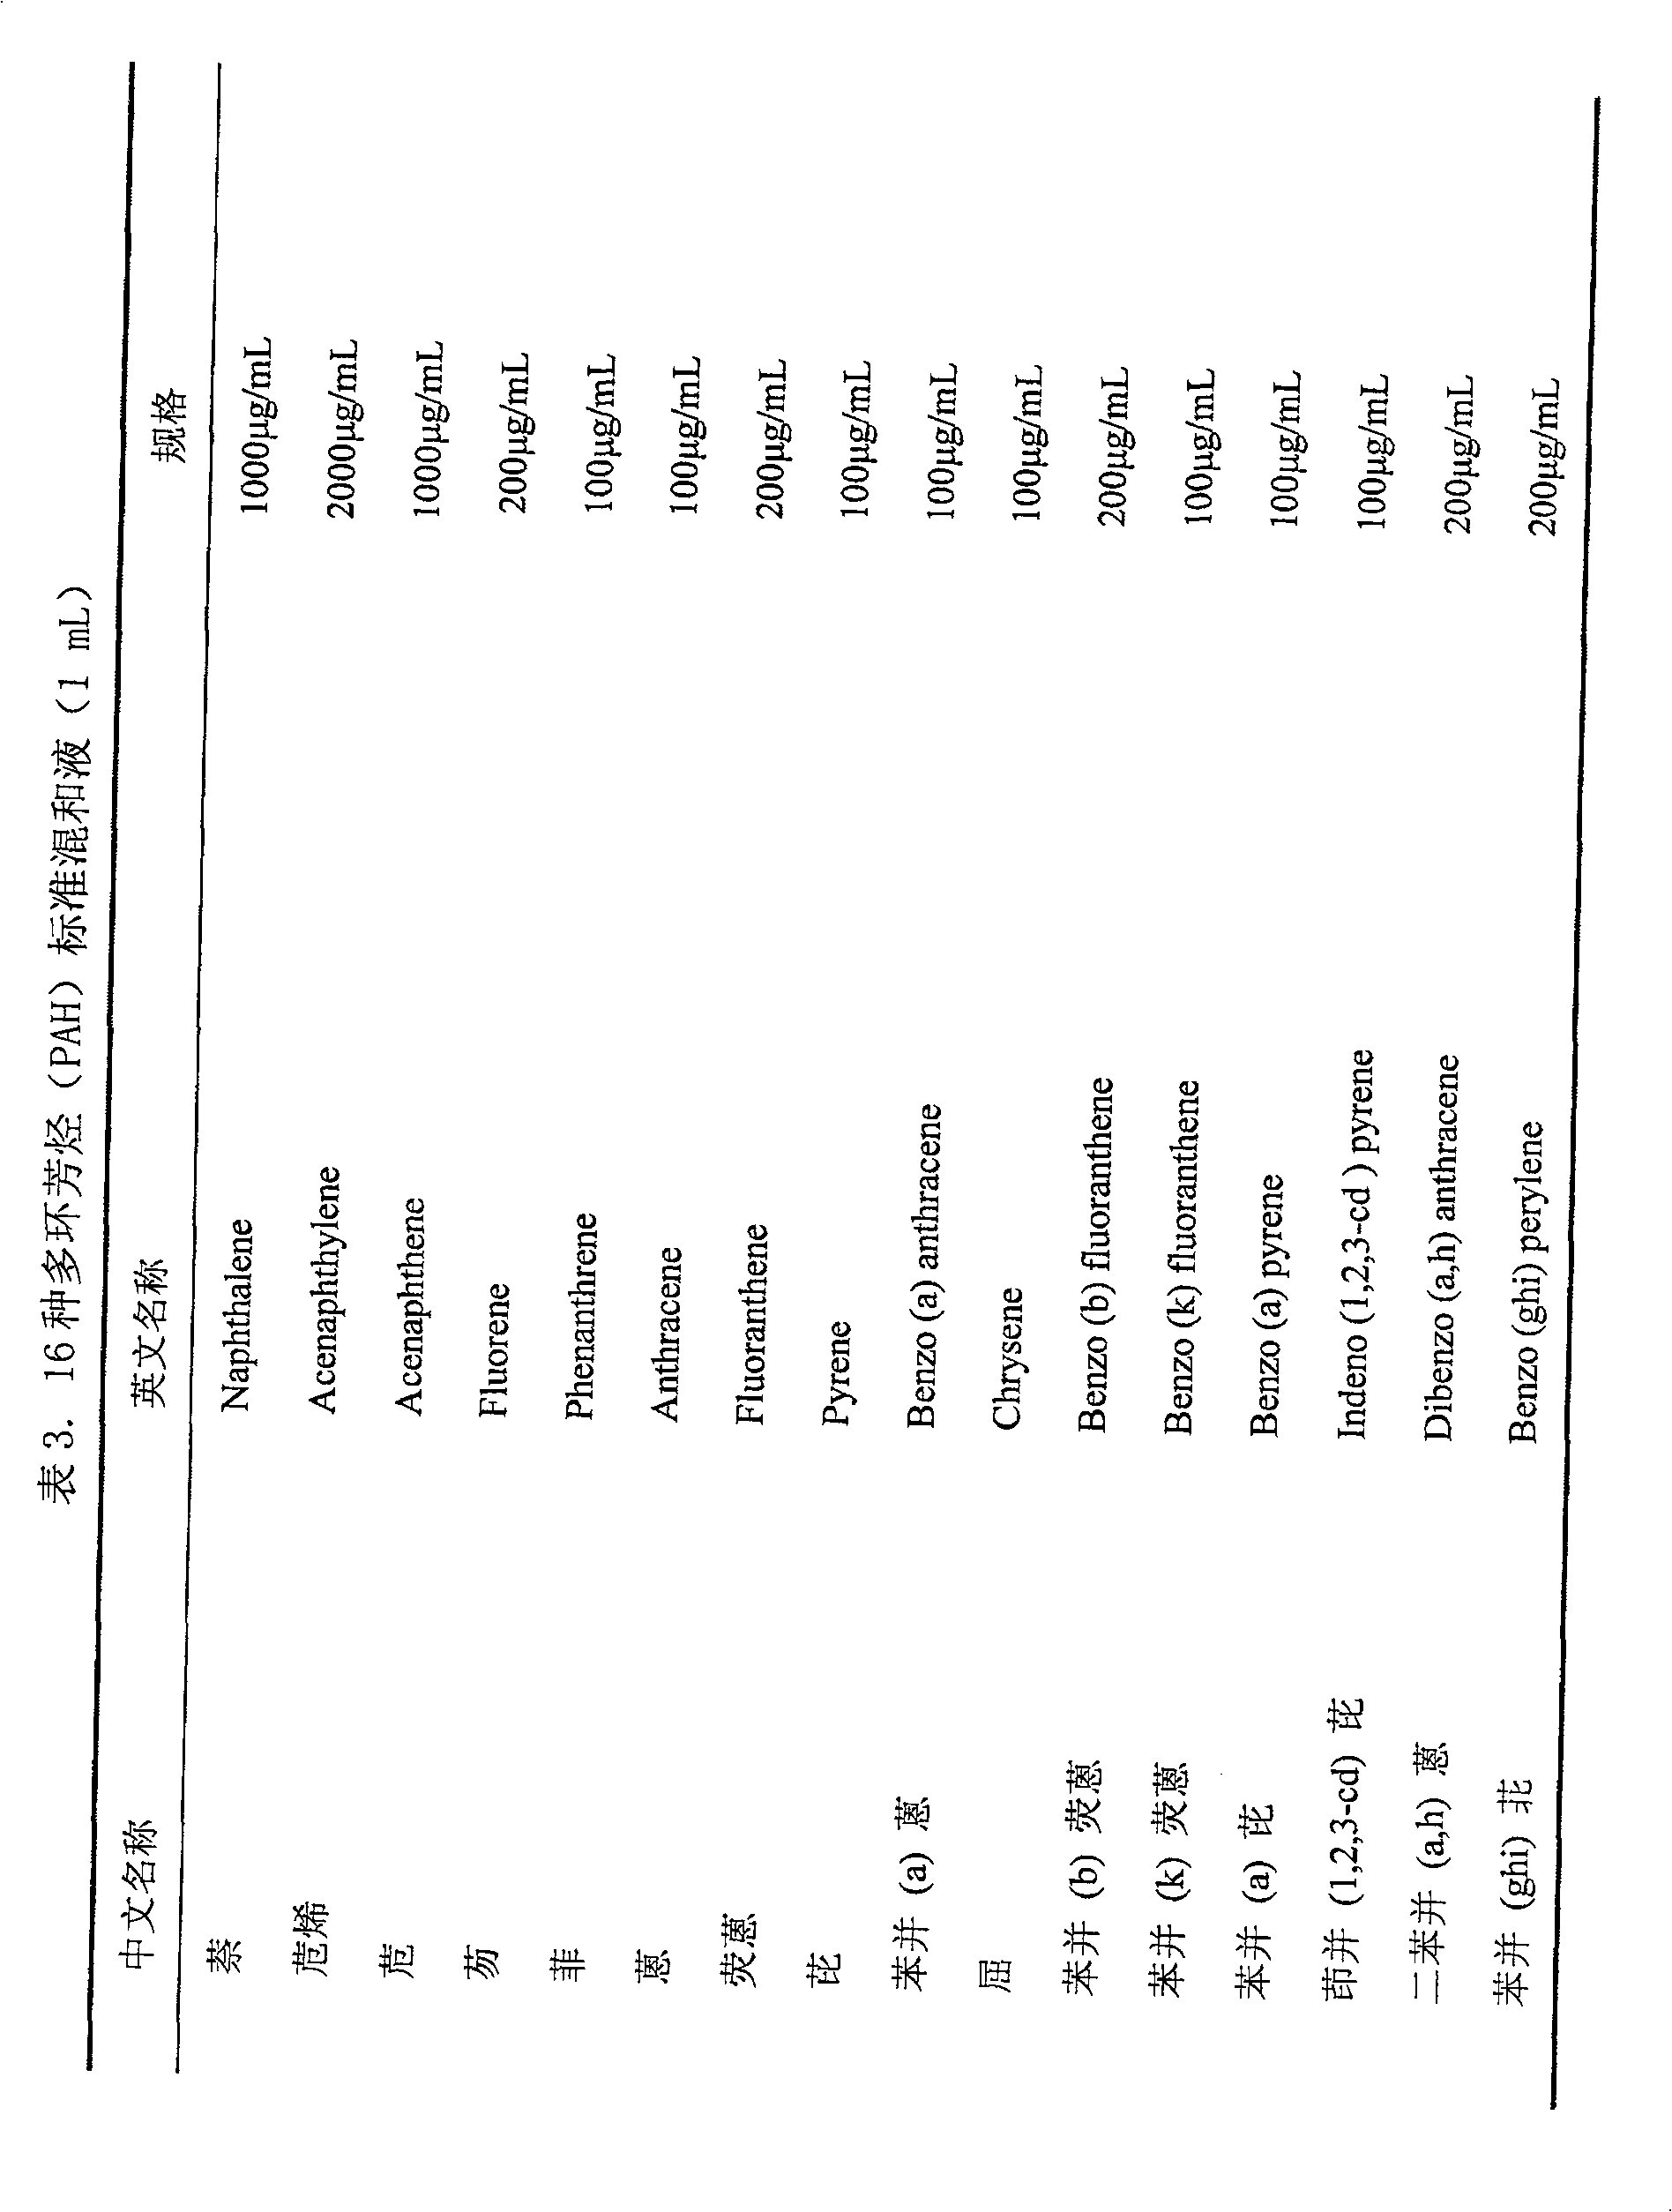 Method for determining polycyclic aromatic hydrocarbons in sludge